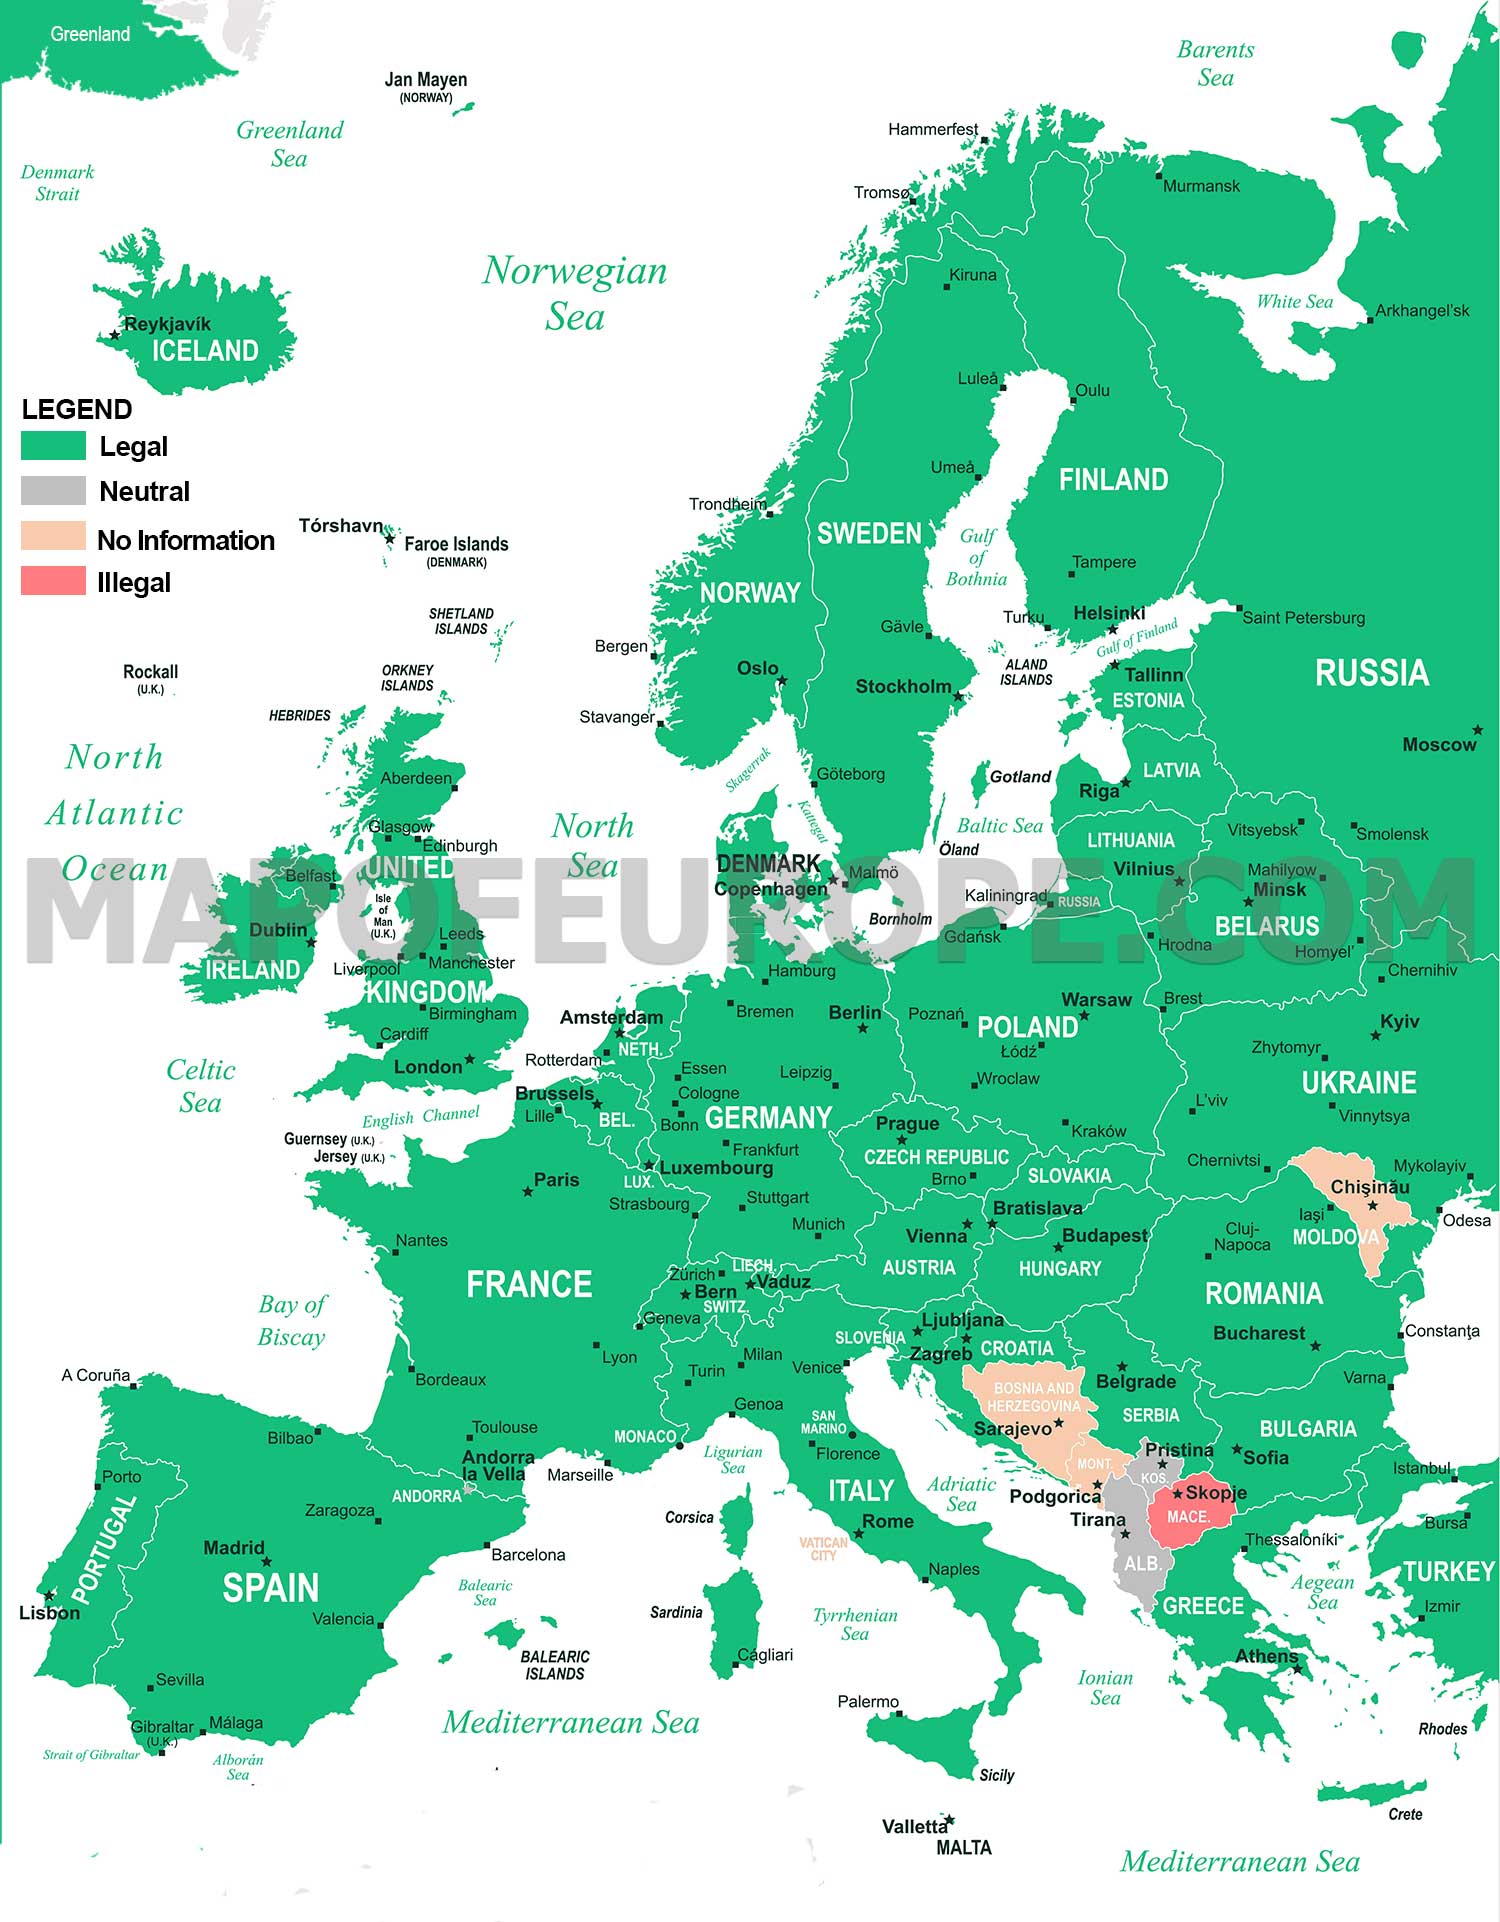 Legal Status of Bitcoin in Europe (Map)